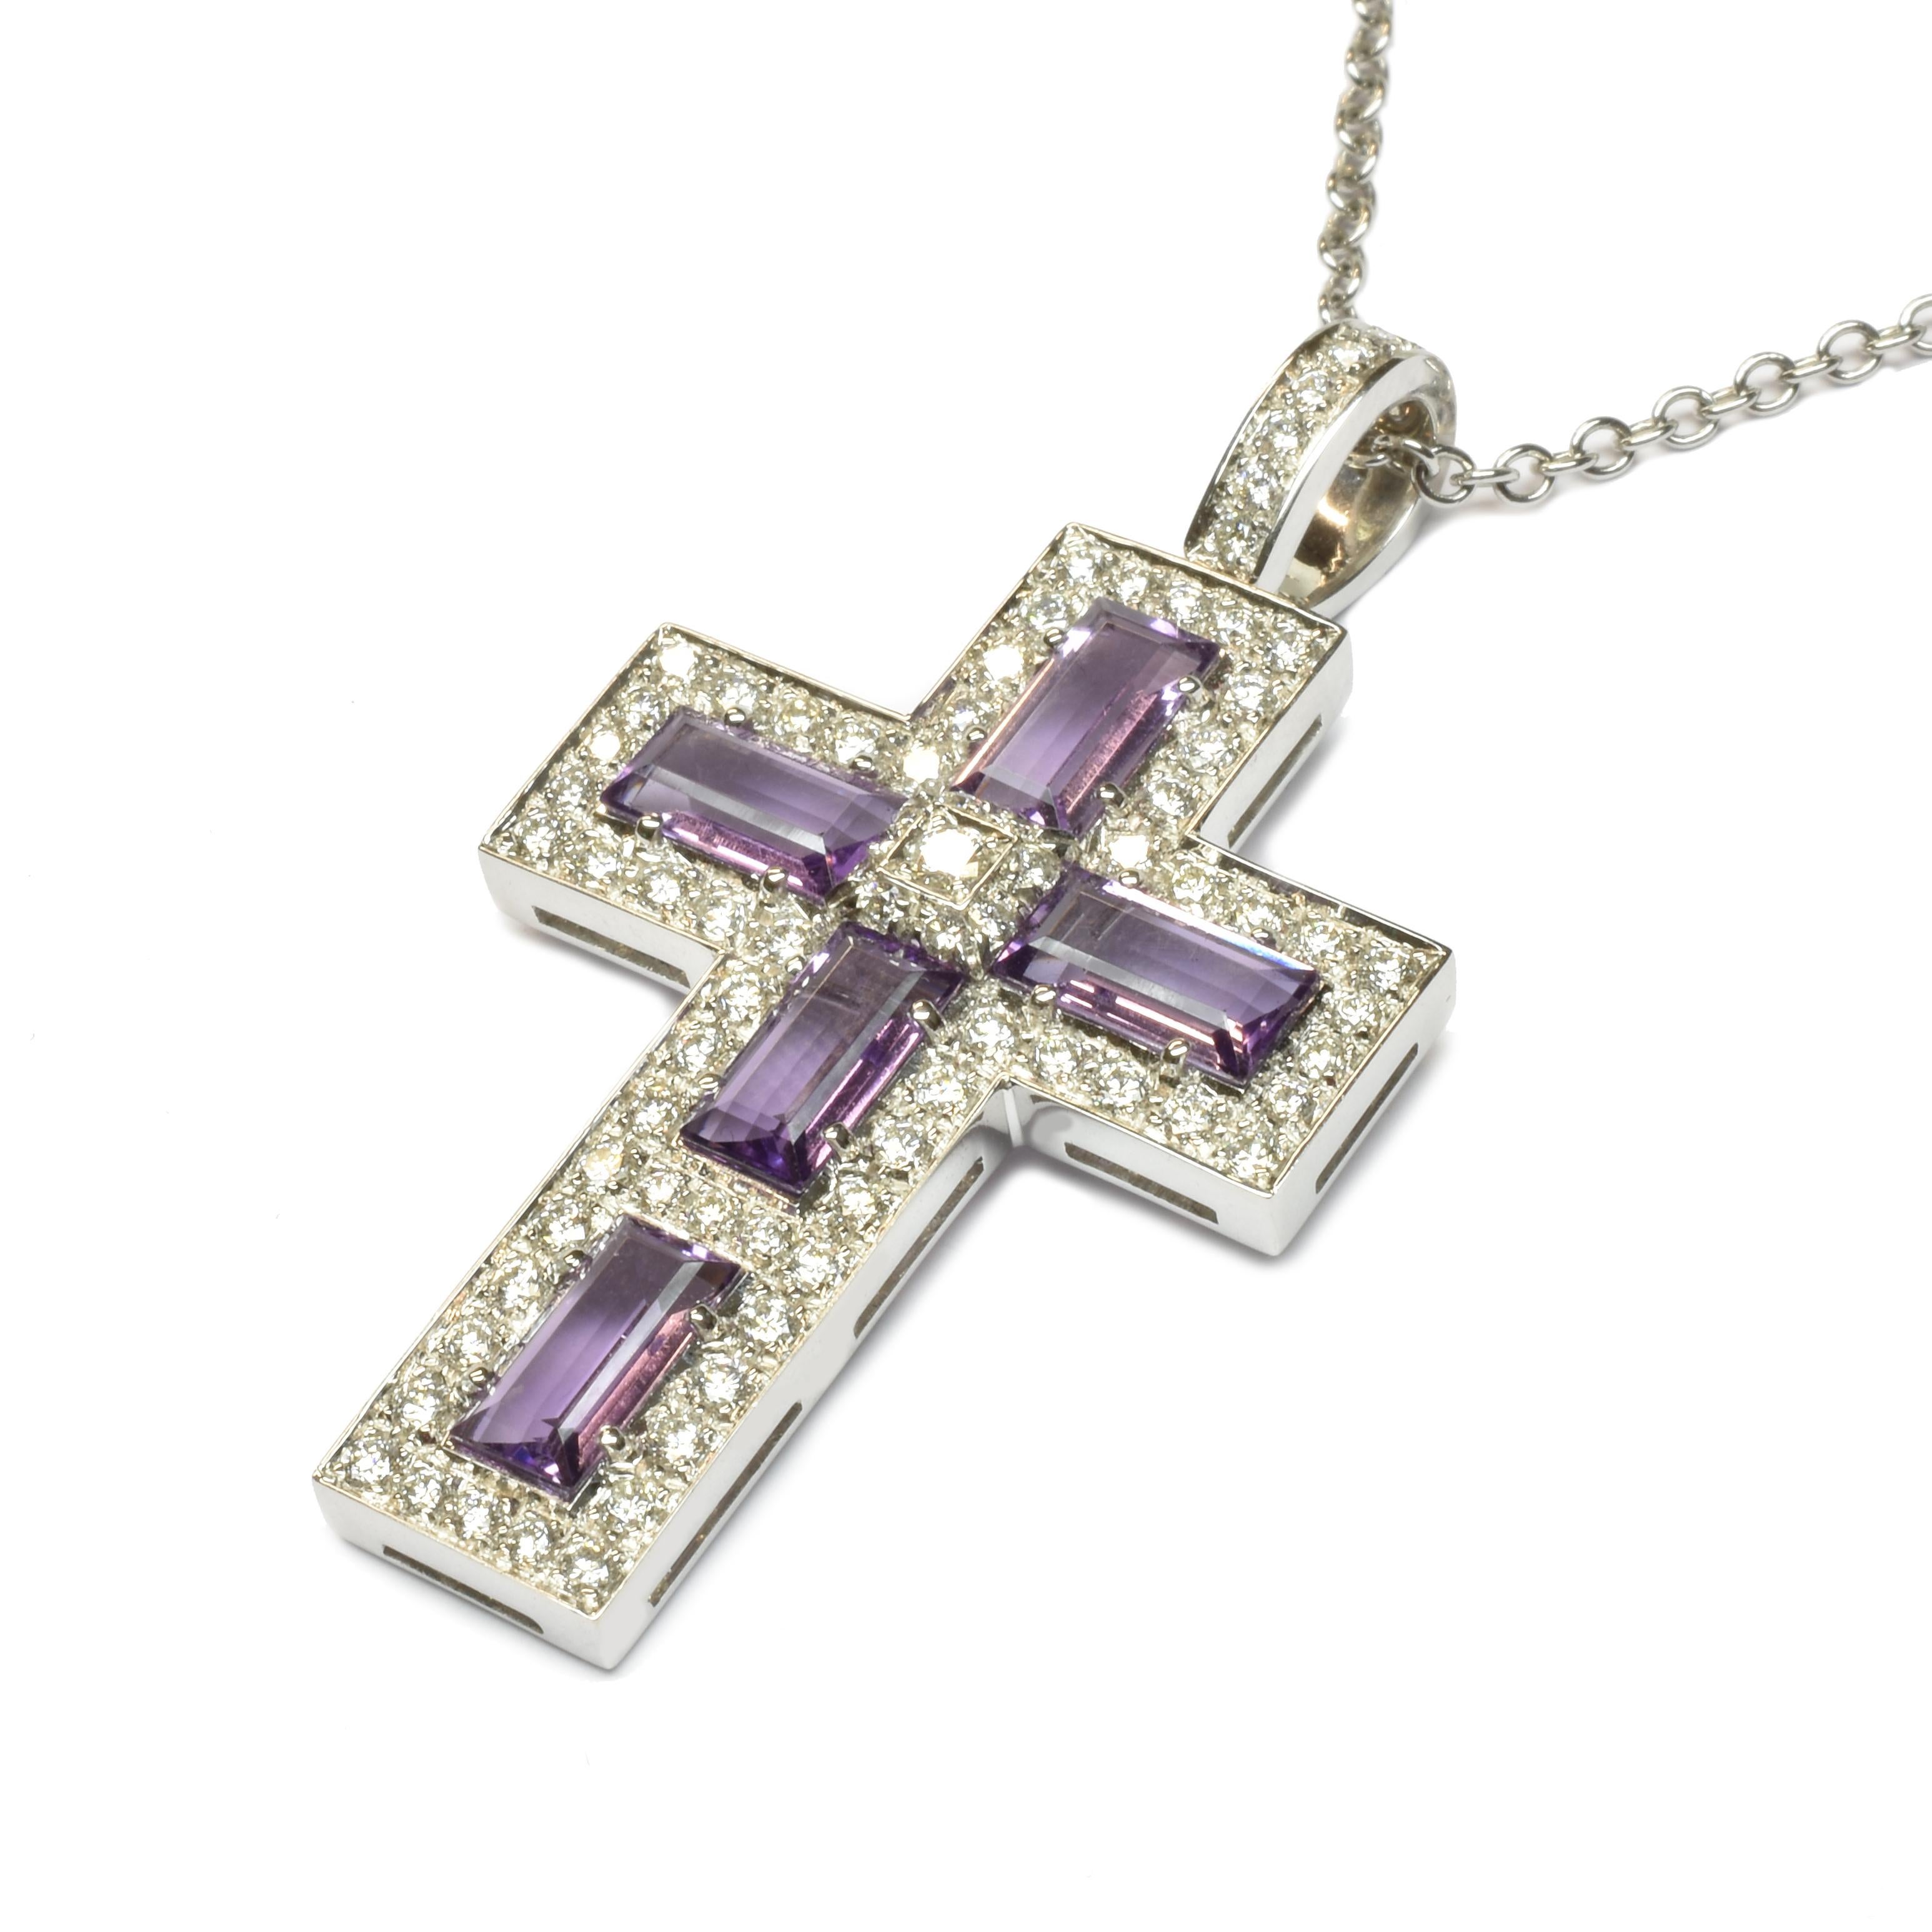 Gilberto Cassola 18Kt White Gold Cross Pendant with Amethyst Baguettes and White Diamonds.
Handmade in our Atelier in Valenza (Italy).
This Piece comes with a 46 cm 18Kt White Gold Chain
A Modern and Stylish Cross for an everyday use.
G Color Vs